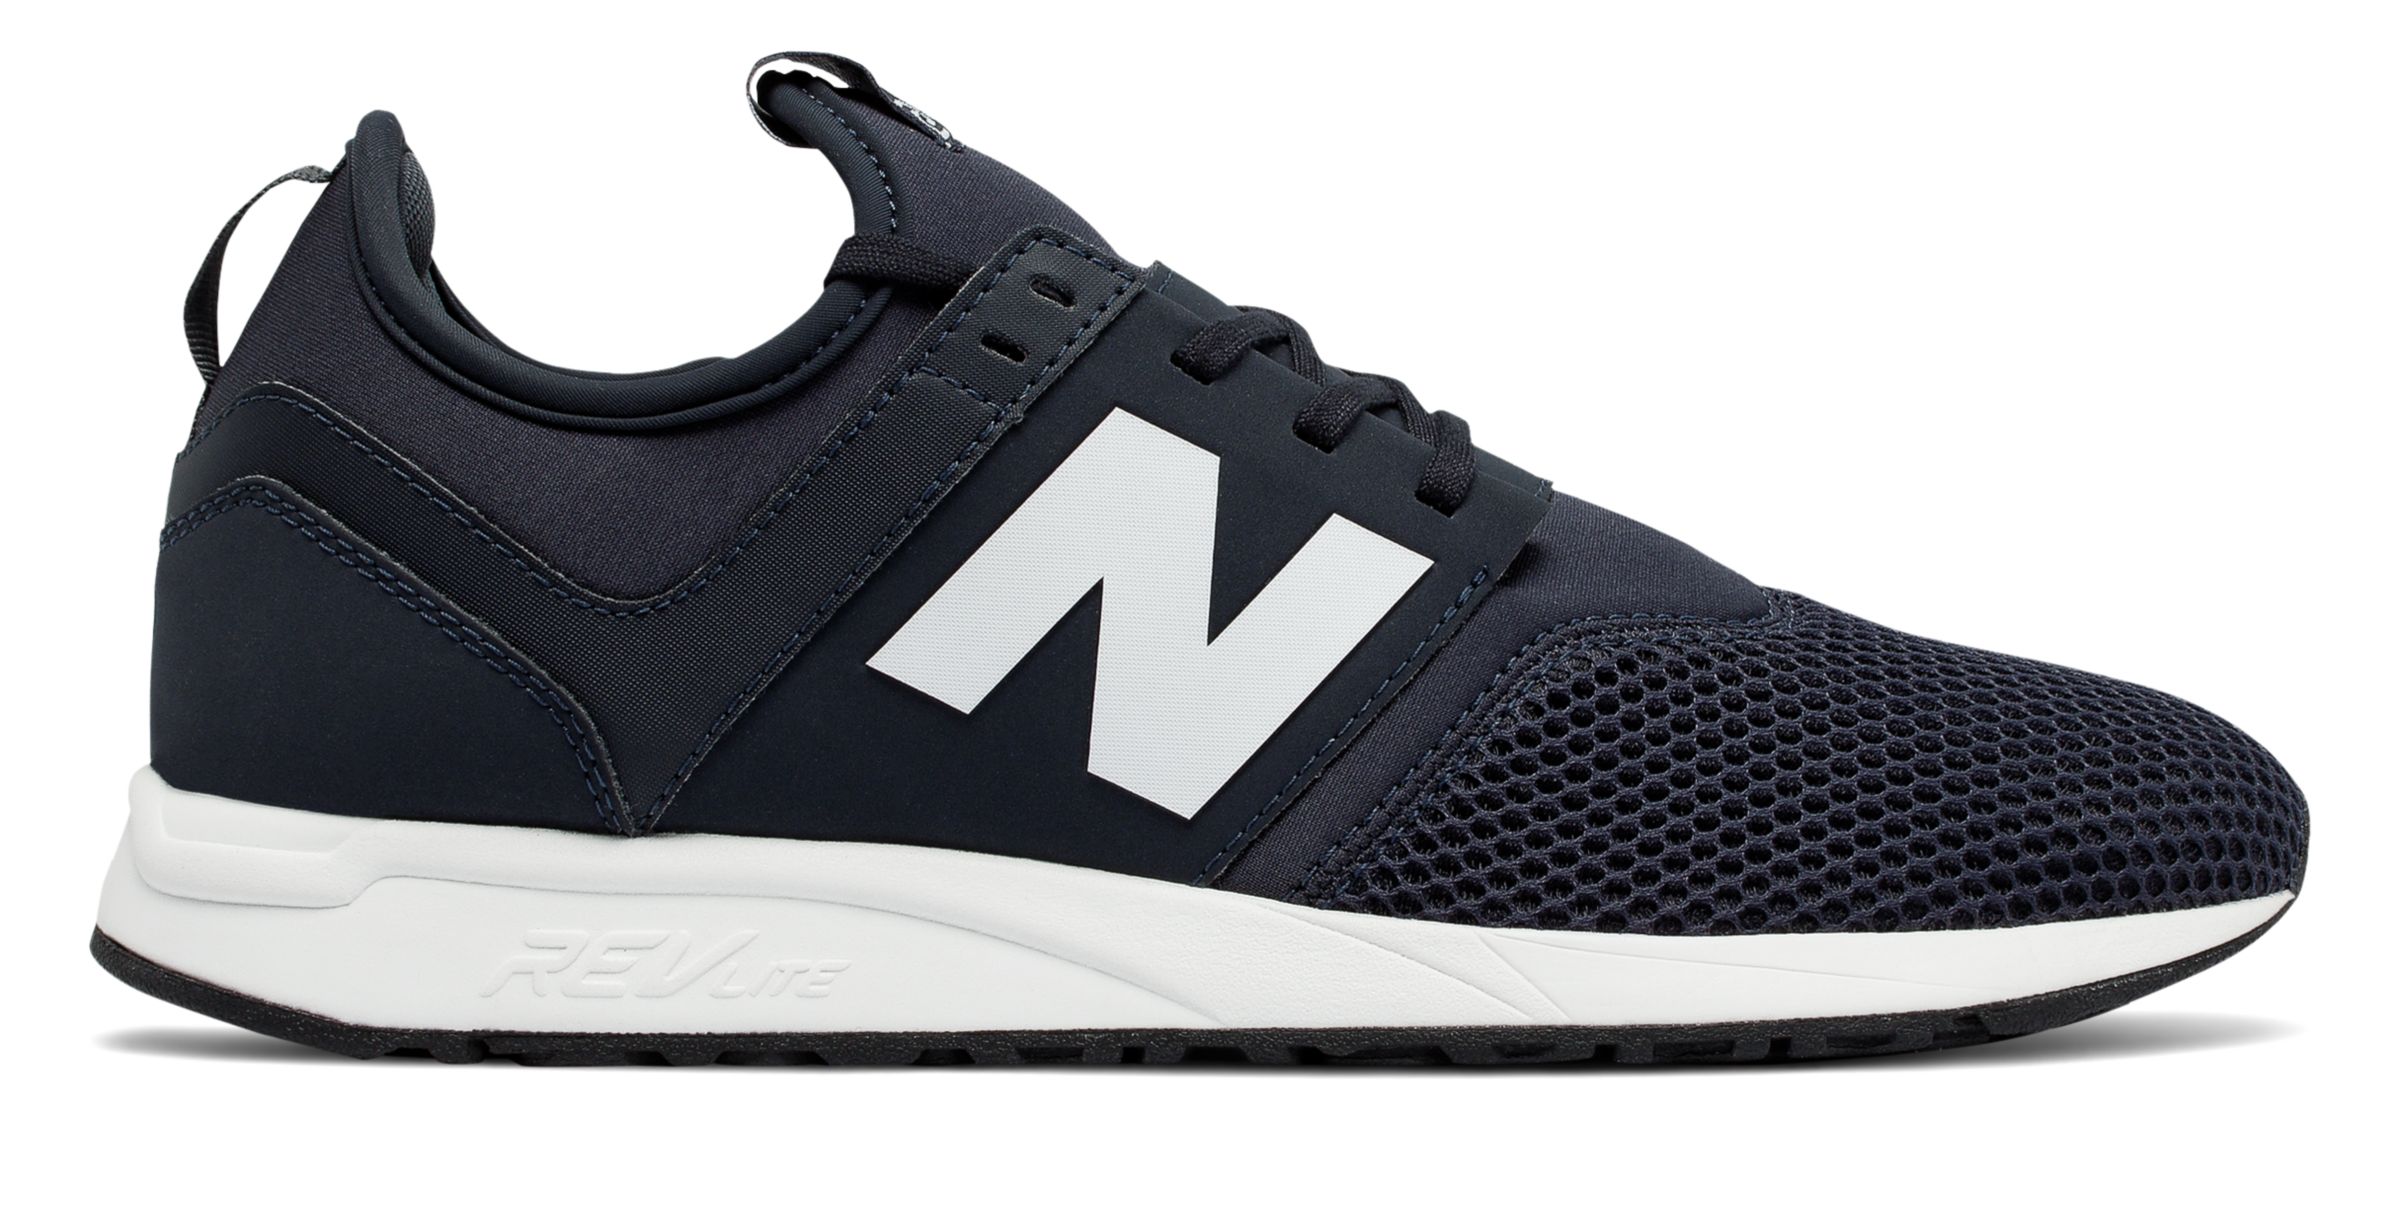 New Balance MRL247-C on Sale - Discounts Up to 58% Off on MRL247RB at Joe's New  Balance Outlet